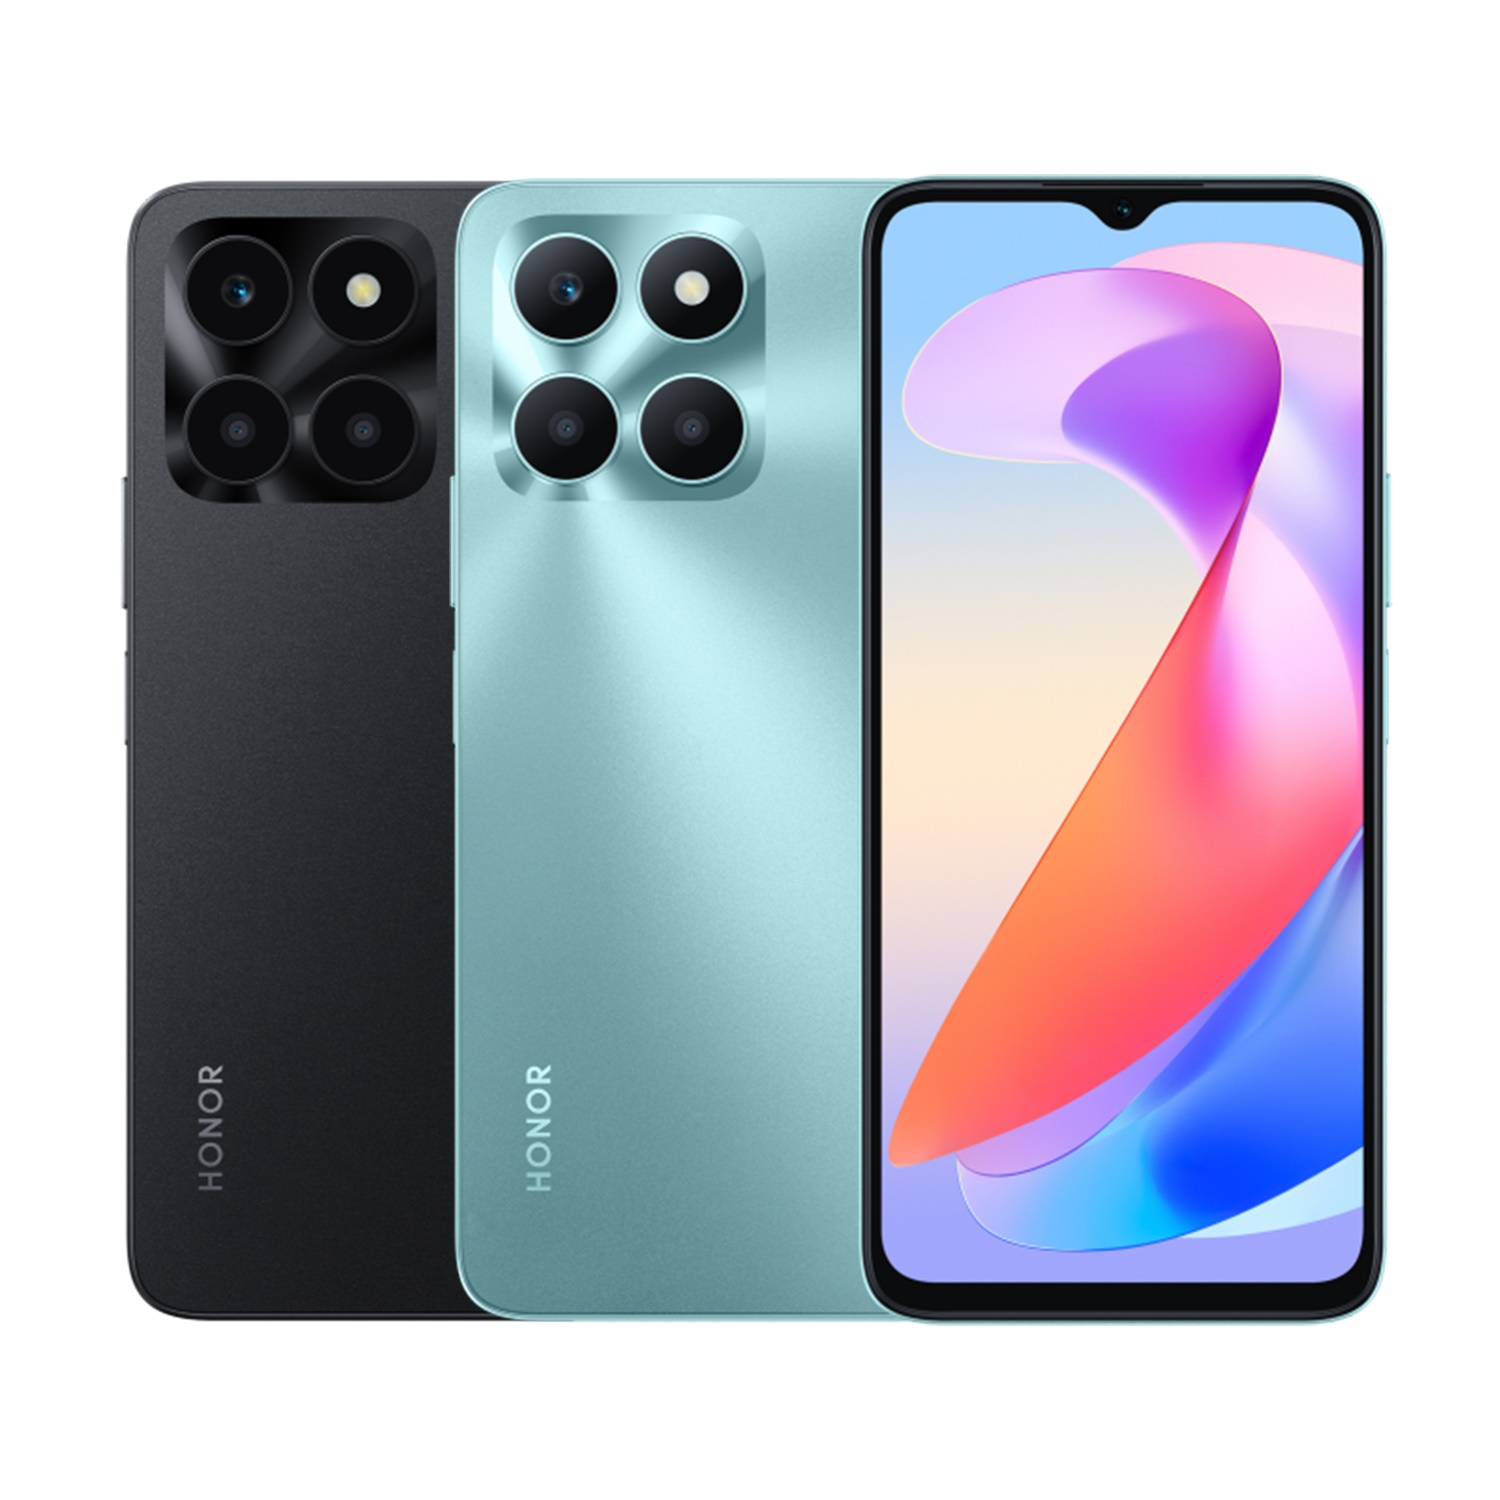 Honor X5 Plus Released 2023, August, 188g, 8.4mm thickness, Android 13, MagicOS 7.1, 64GB storage, microSDXC, 6.56"720x1612 pixels, 50MP1080p, 4GB RAMHelio G36, 5200mAh10W